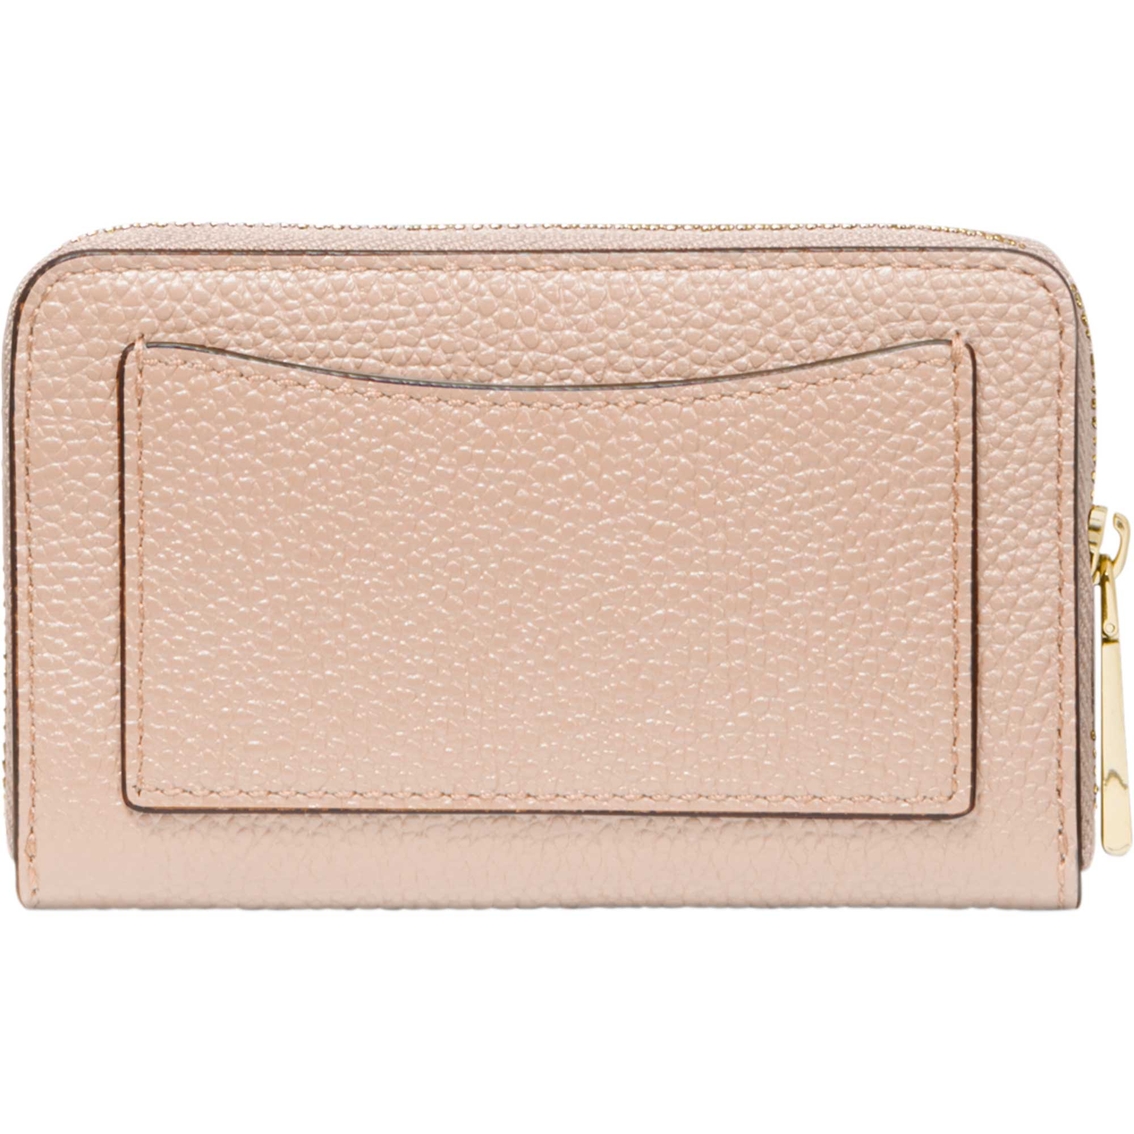 Michael Kors Zip Around Leather Card Case - Image 2 of 3